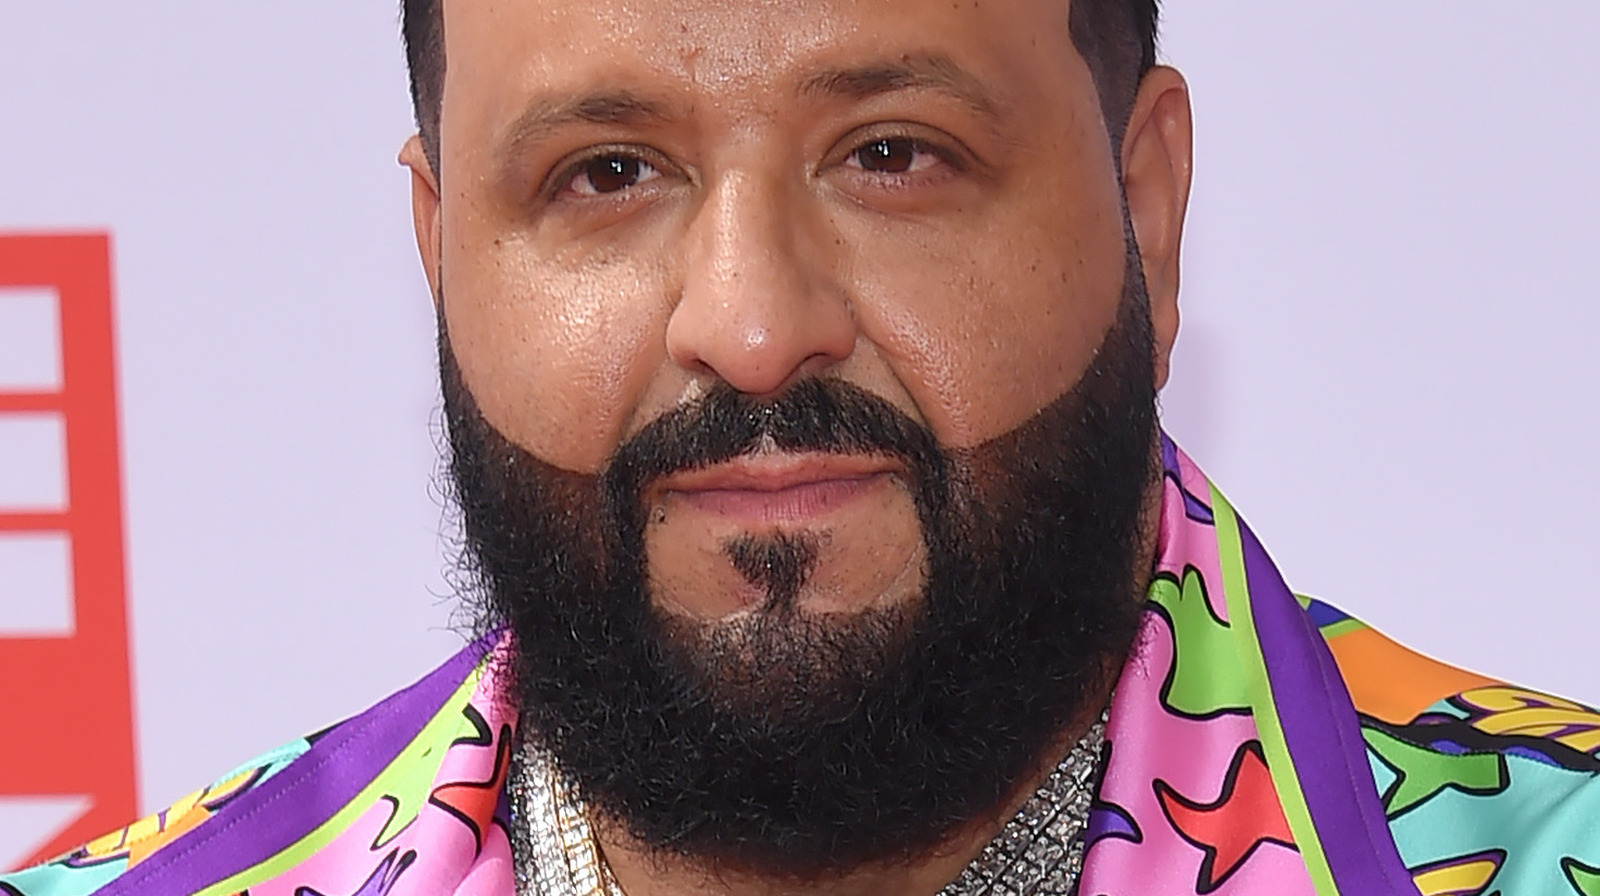 DJ Khaled's Wings Now Come In A Plant-Based Version, Too